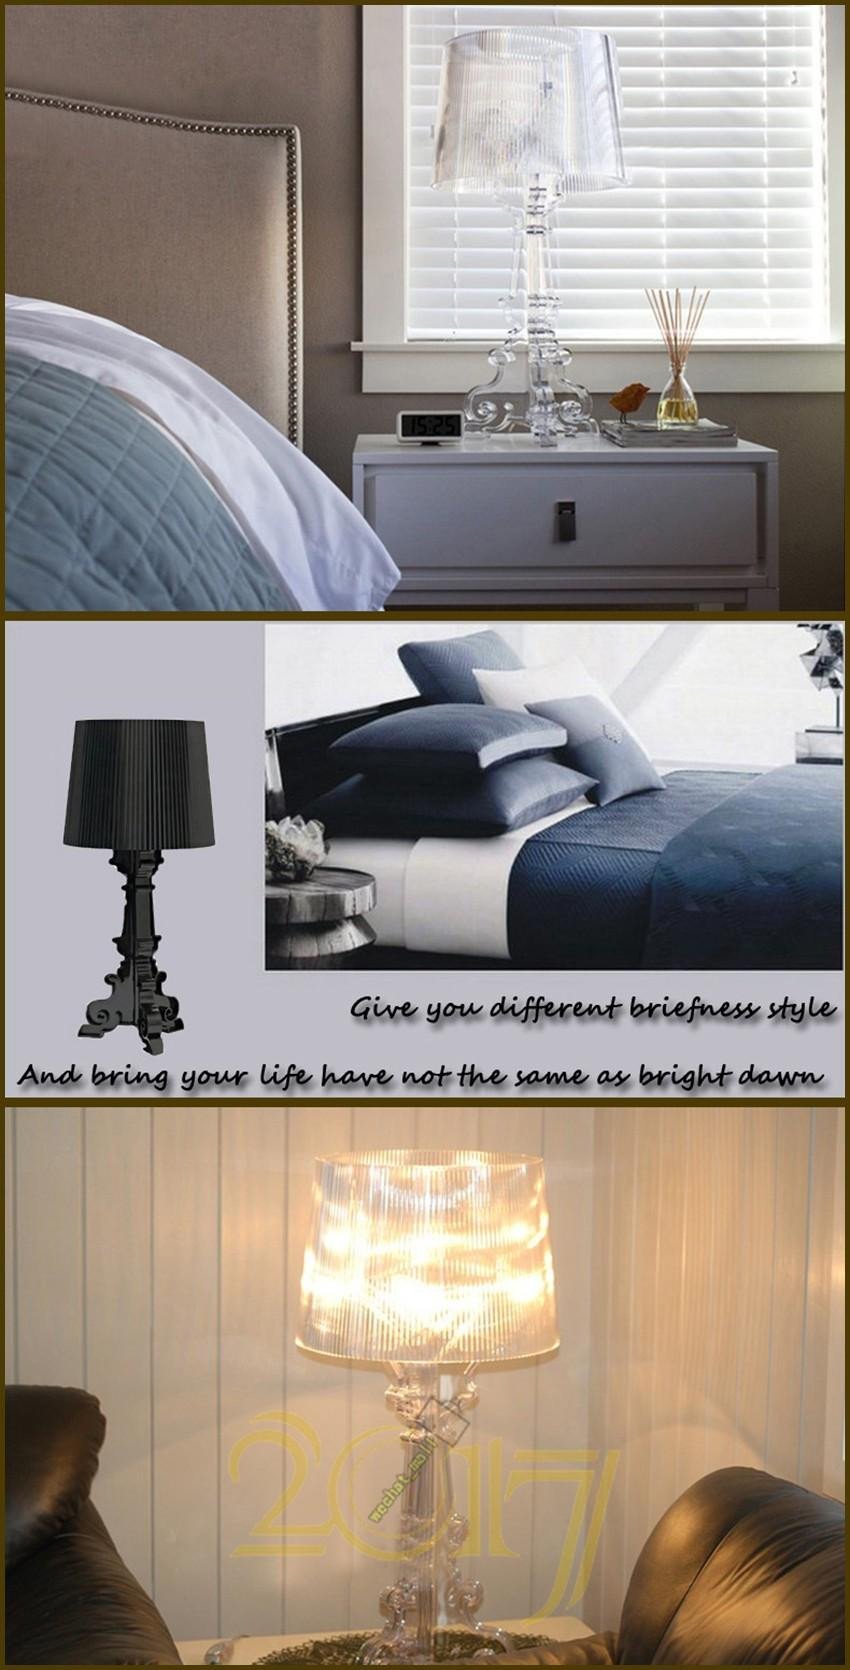 Clip On Bedroom Light Unique 2019 Desk Lamp Modern Table Lamps for Bedroom Ghost Shadow Bedside Lamp Acrylic Material Lamparas De Mesa Creative New Design Lamp From Wechat Mall